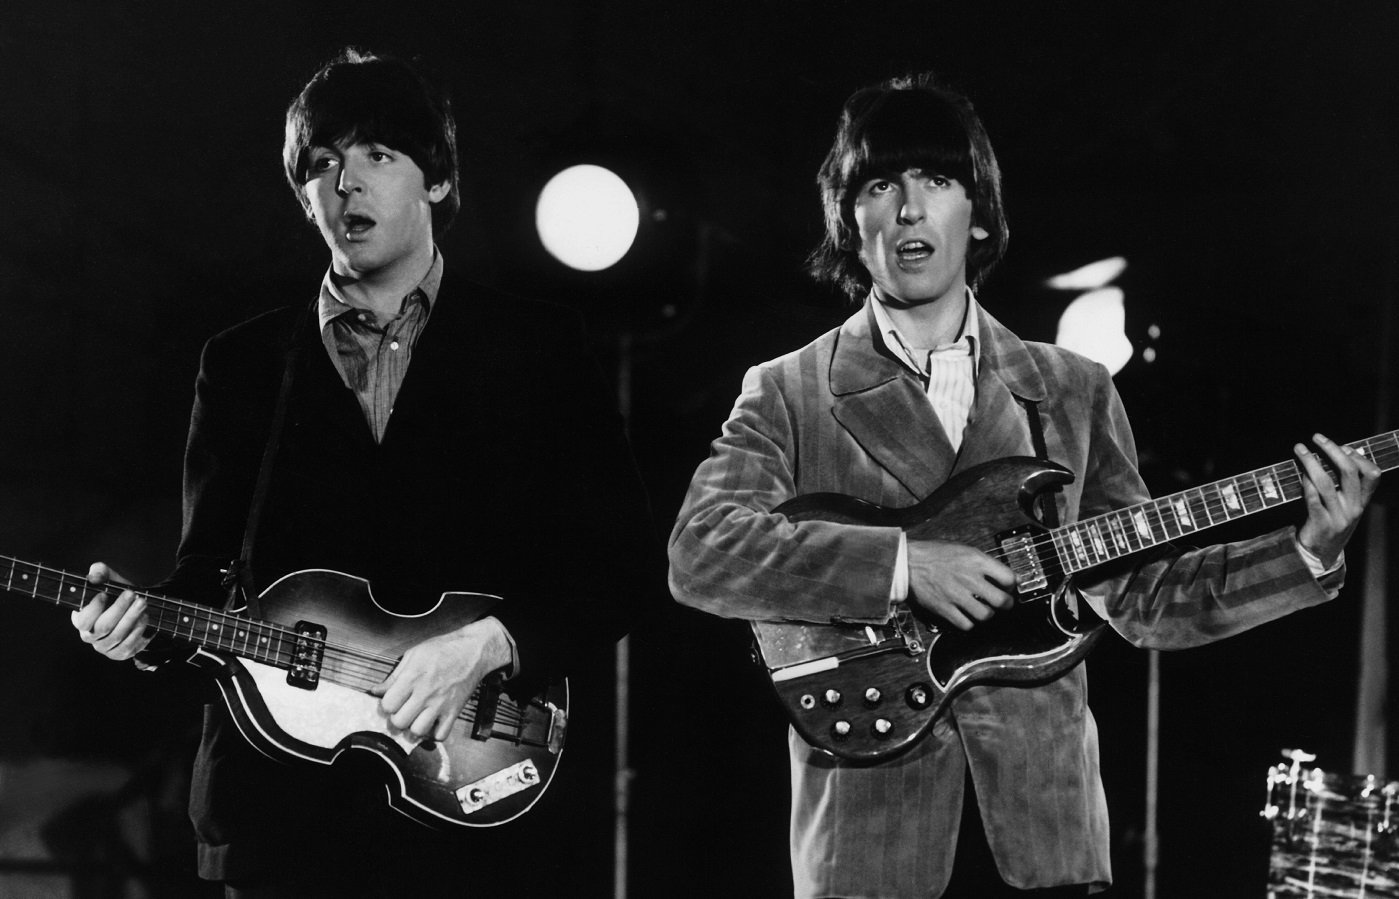 Beatles Paul and George playing their guitars on stage